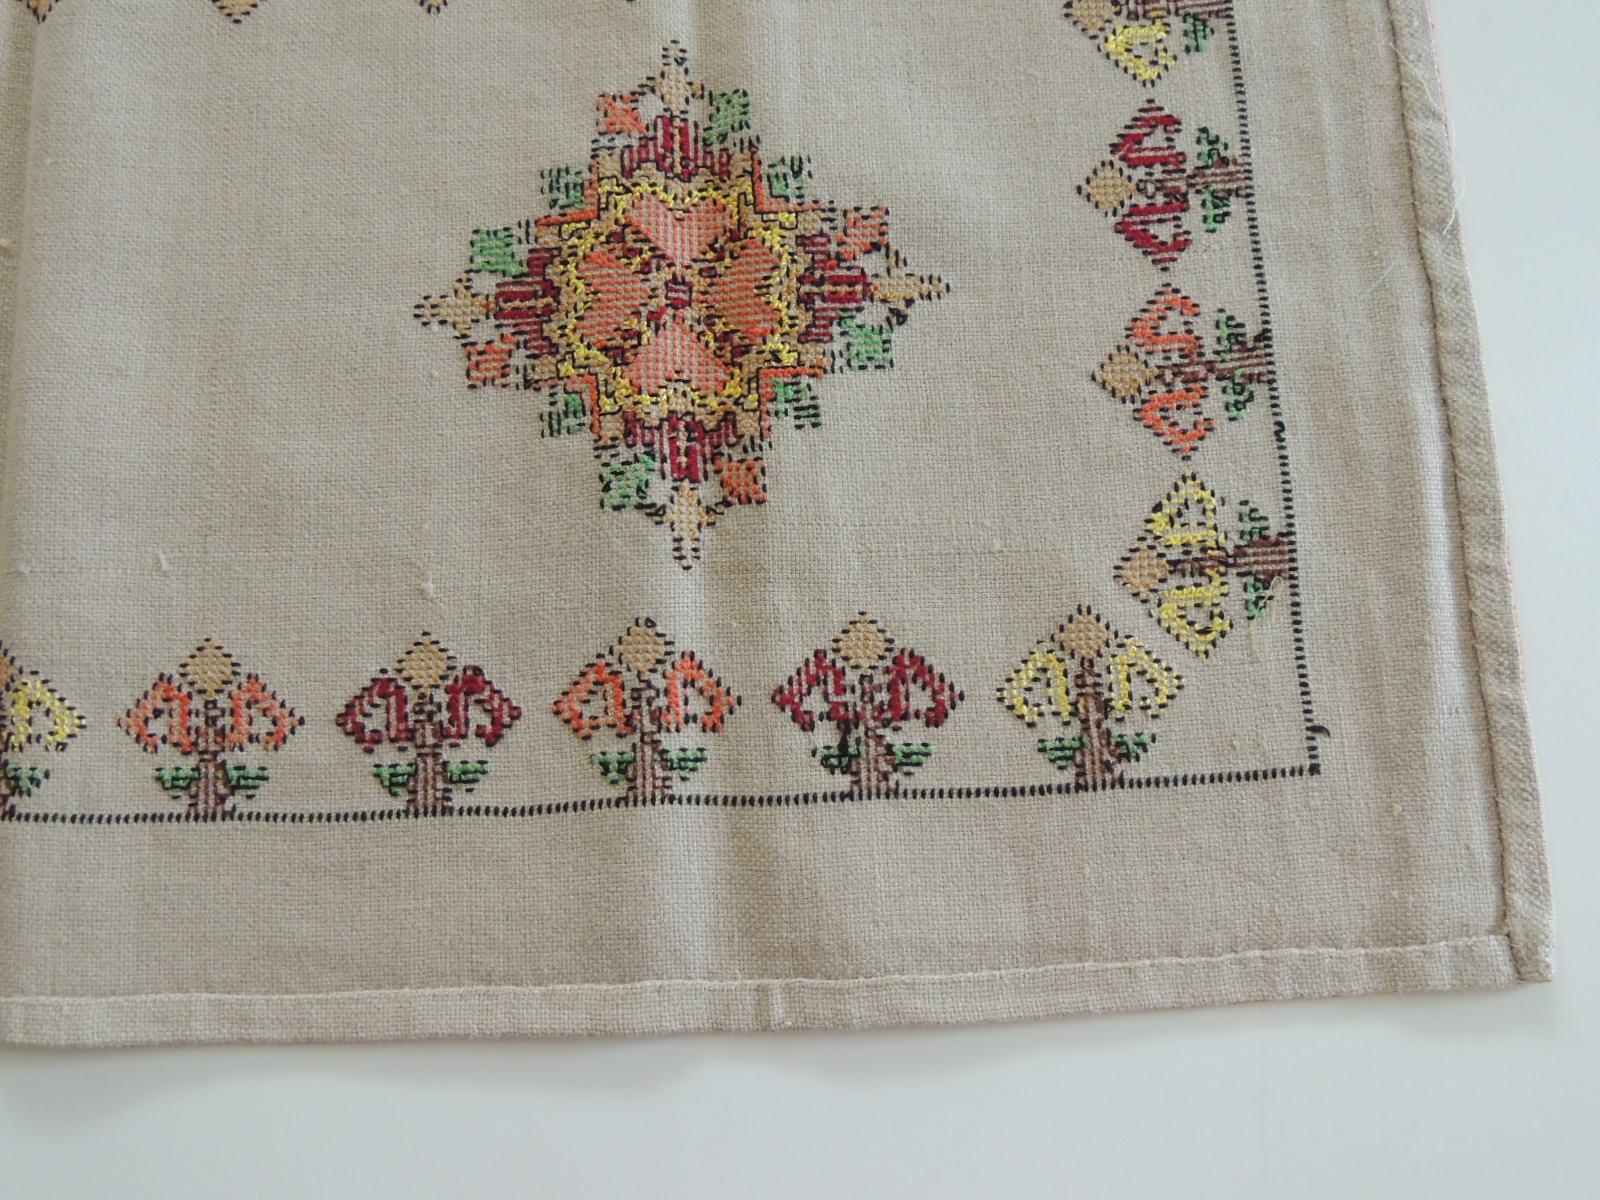 Hand-Crafted Vintage Colorful Embroidered Table Runner Textile